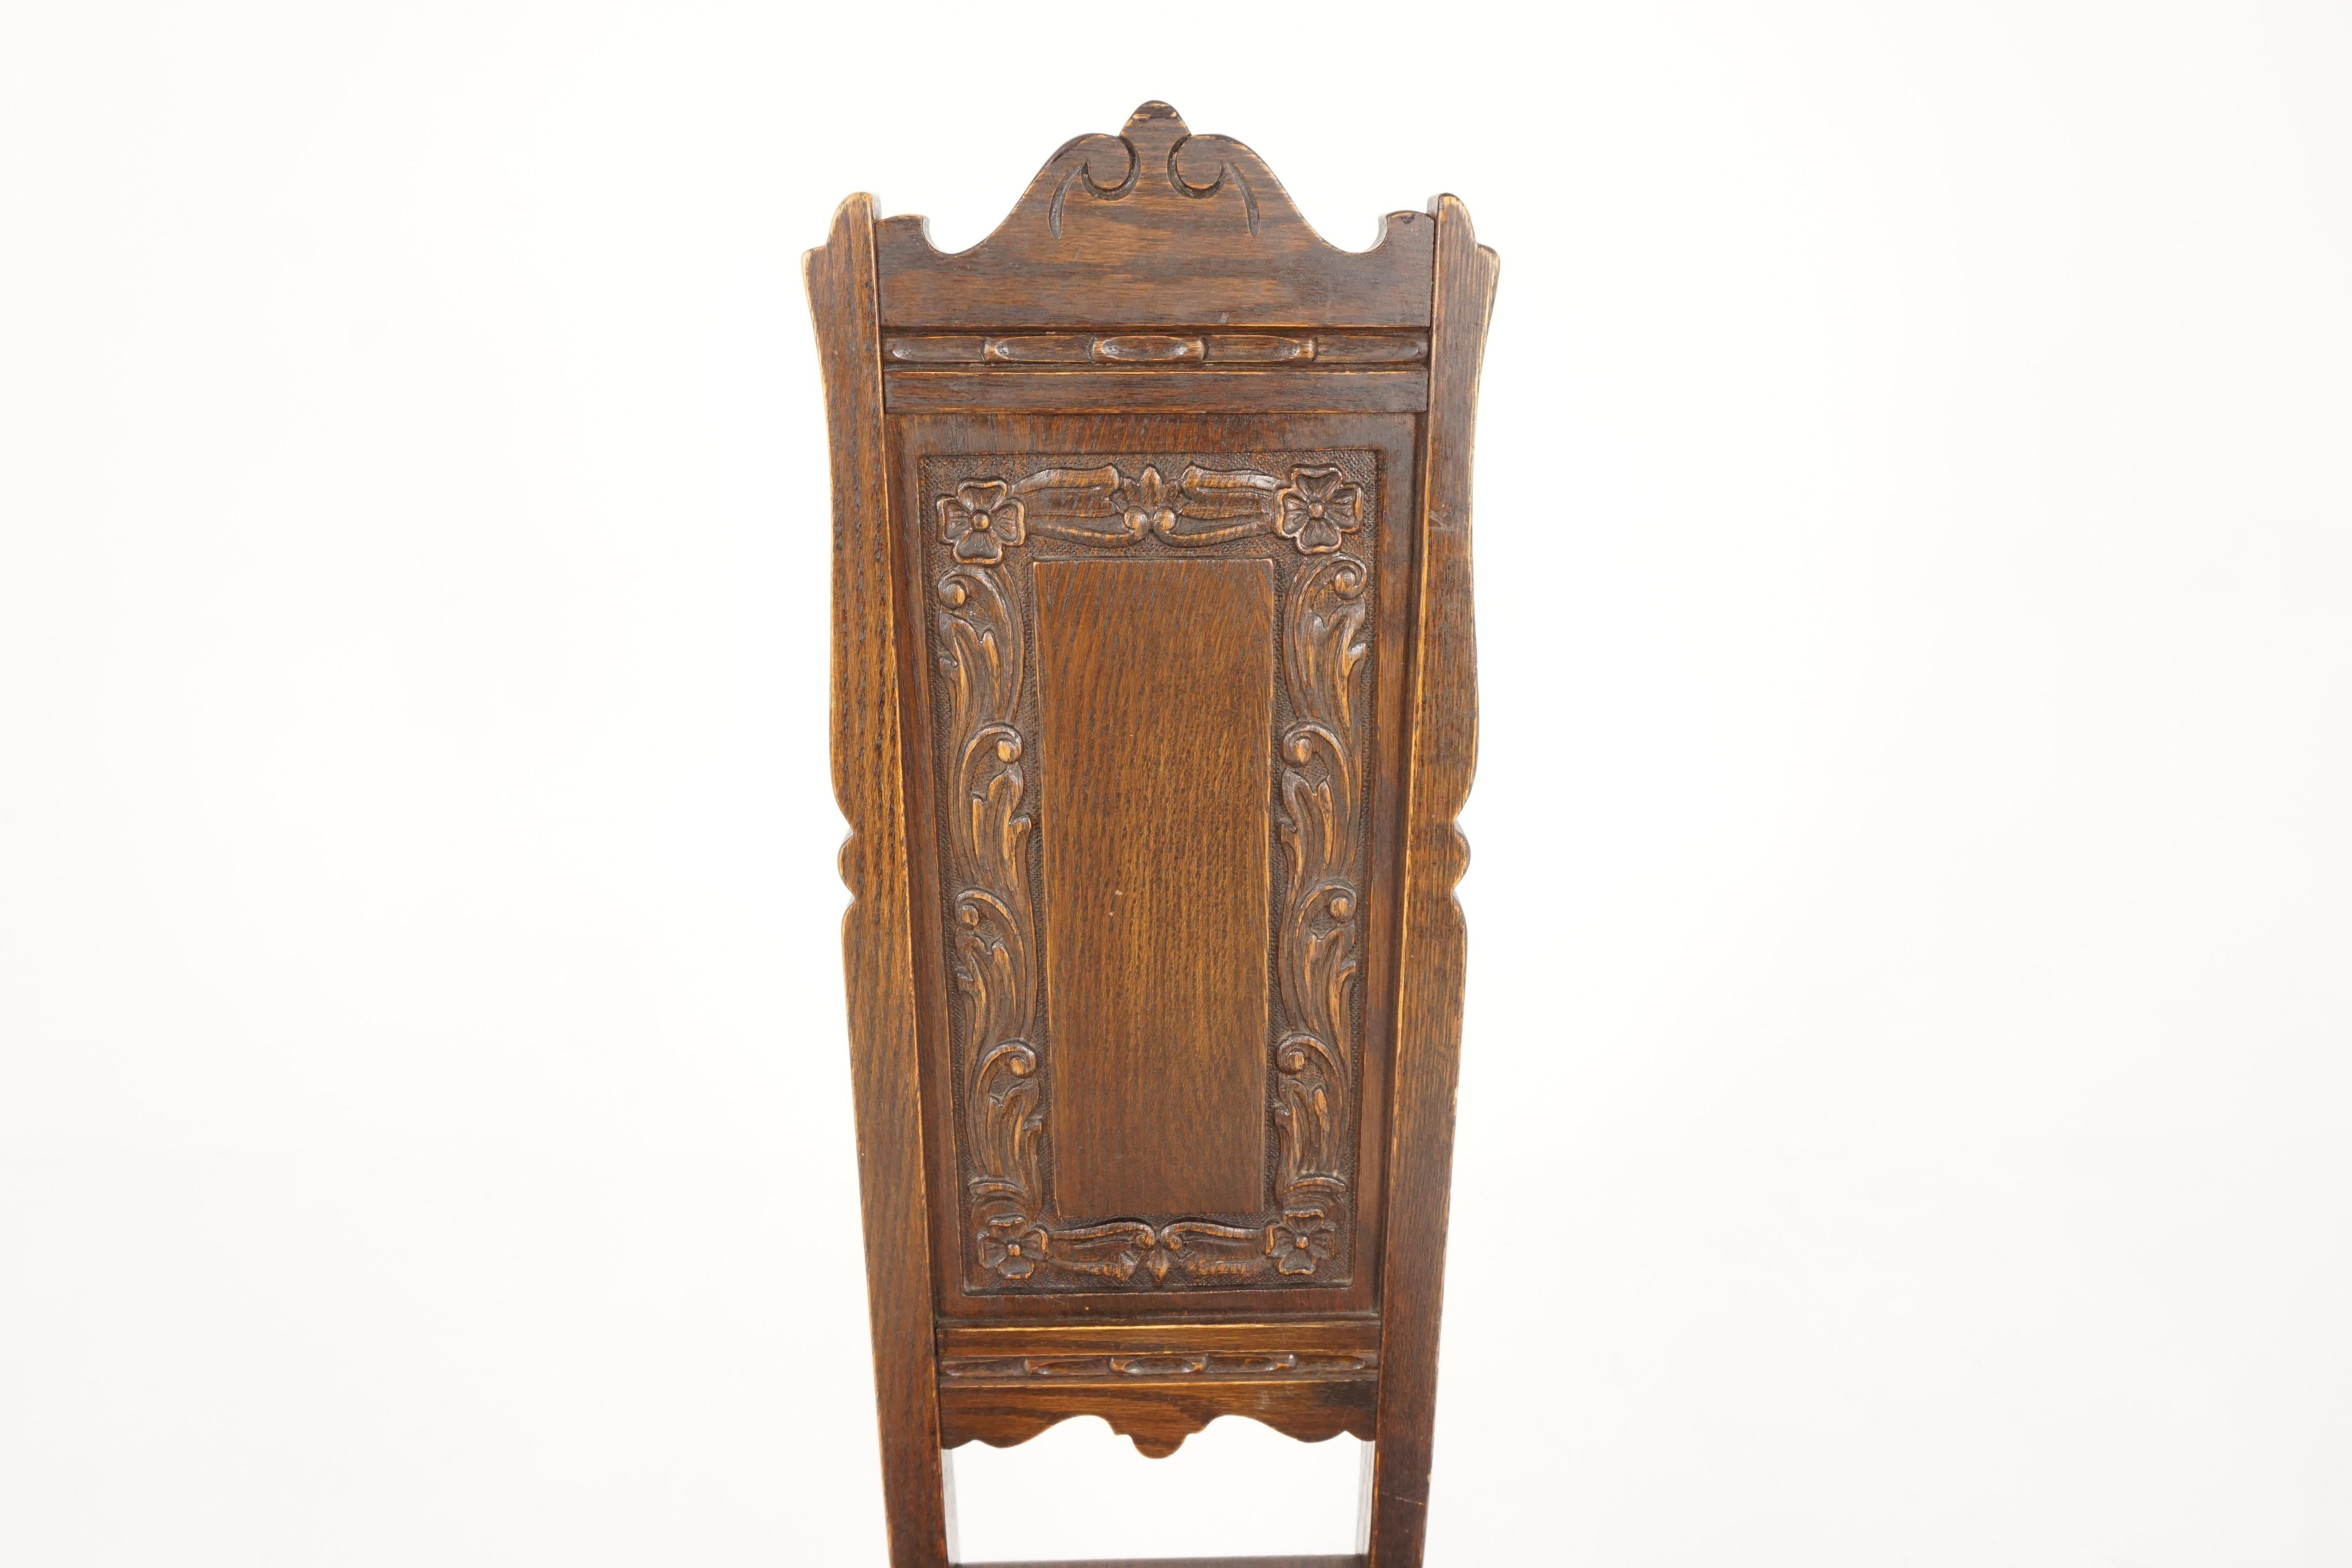 Antique carved oak barley twist hall chair, Scotland 1920, B2323

Scotland, 1920
Solid oak
Original finish
Carved top rail with carved panel back
Solid shaped oak seat
Standing on a pair of barley twist legs to the front and outswept legs to